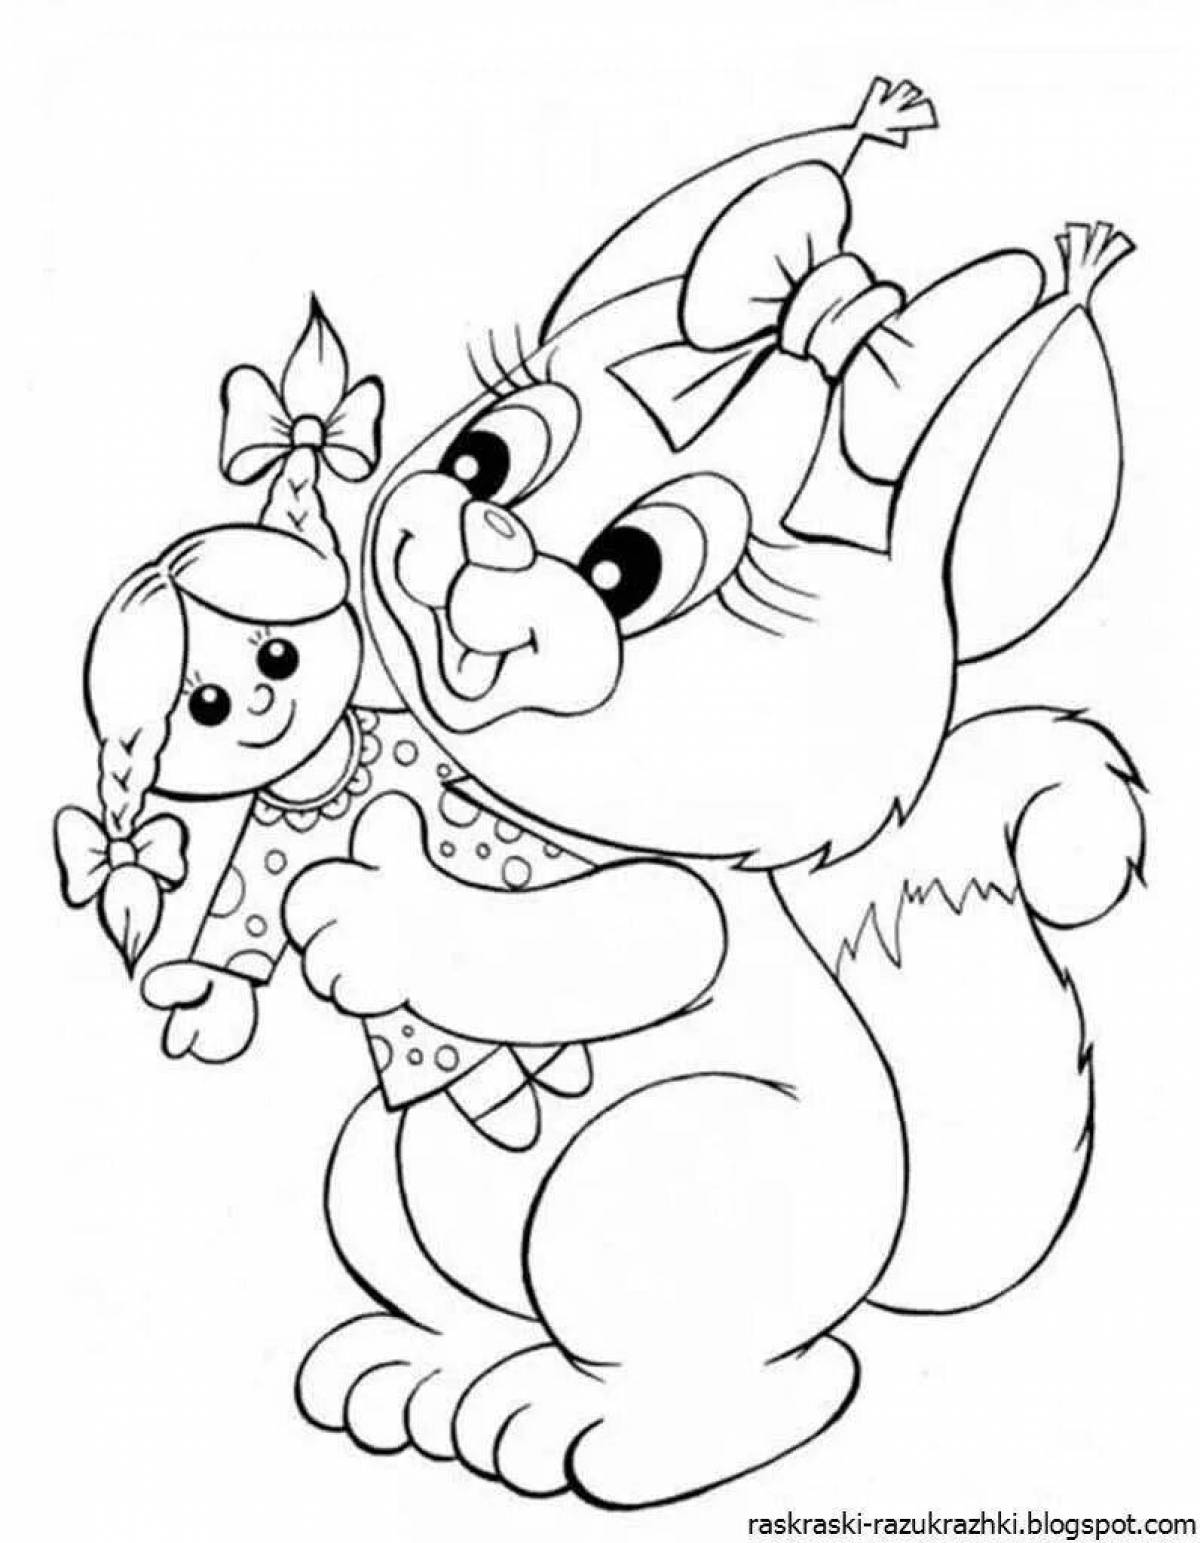 Crazy squirrel coloring book for kids 6-7 years old